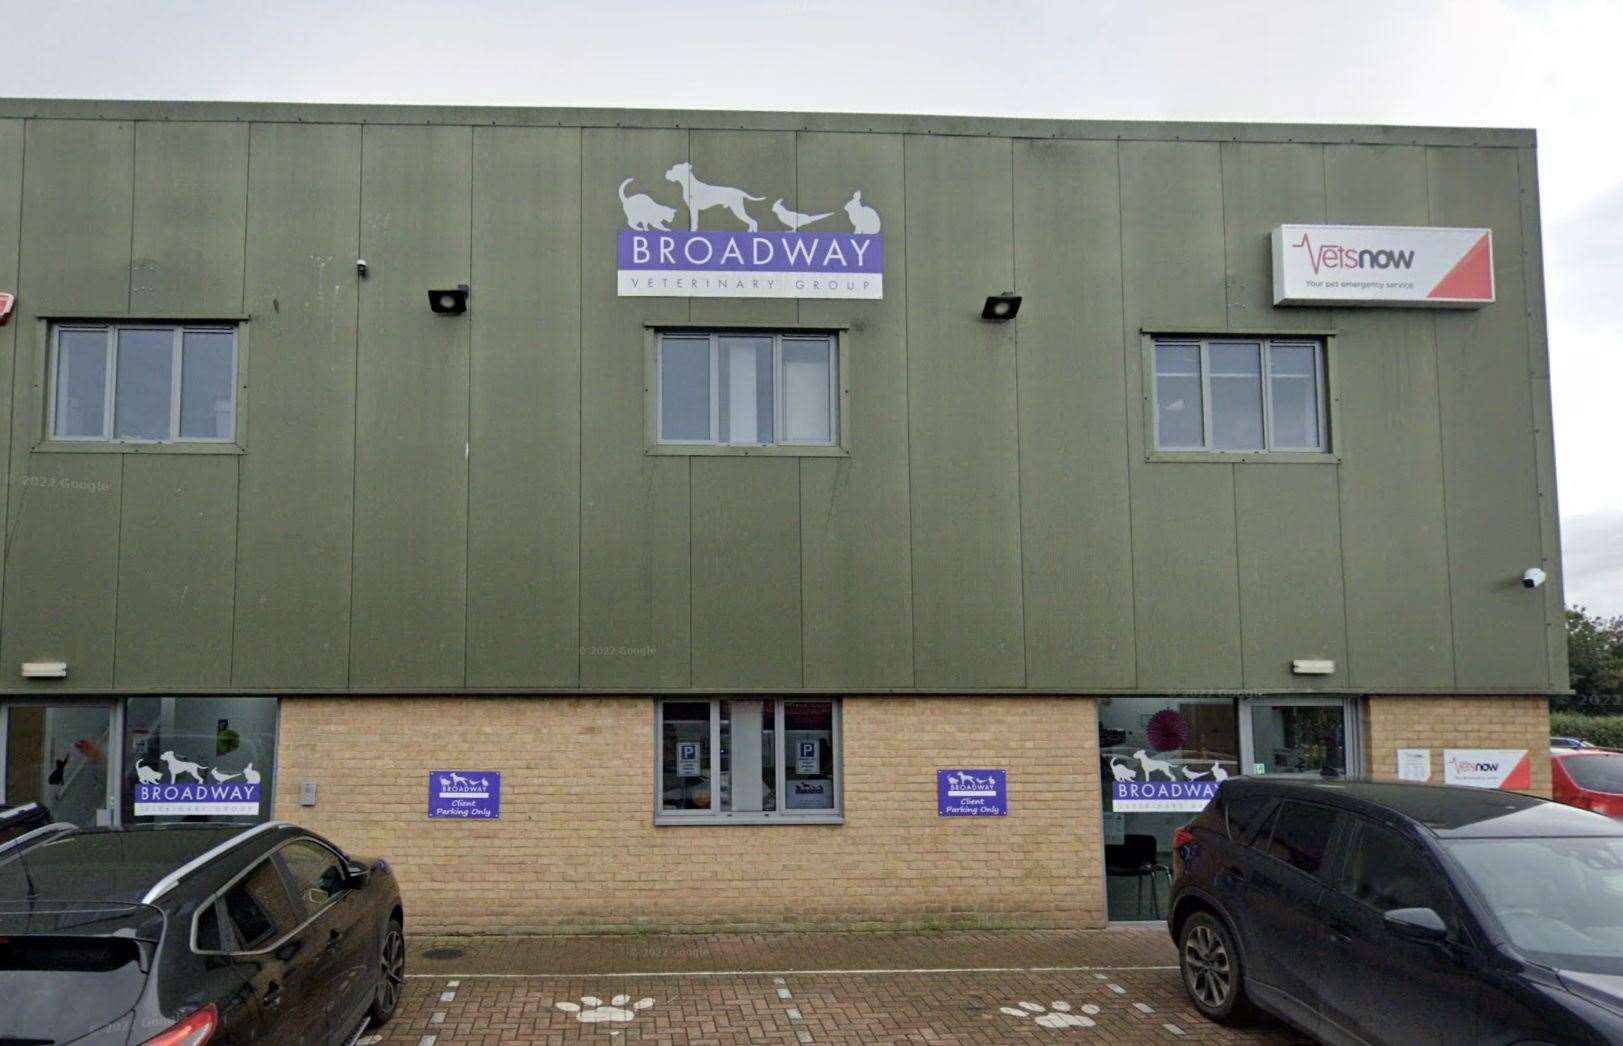 Broadway Veterinarian Group's surgery one the Herne Bay Business Park. Pic: Google